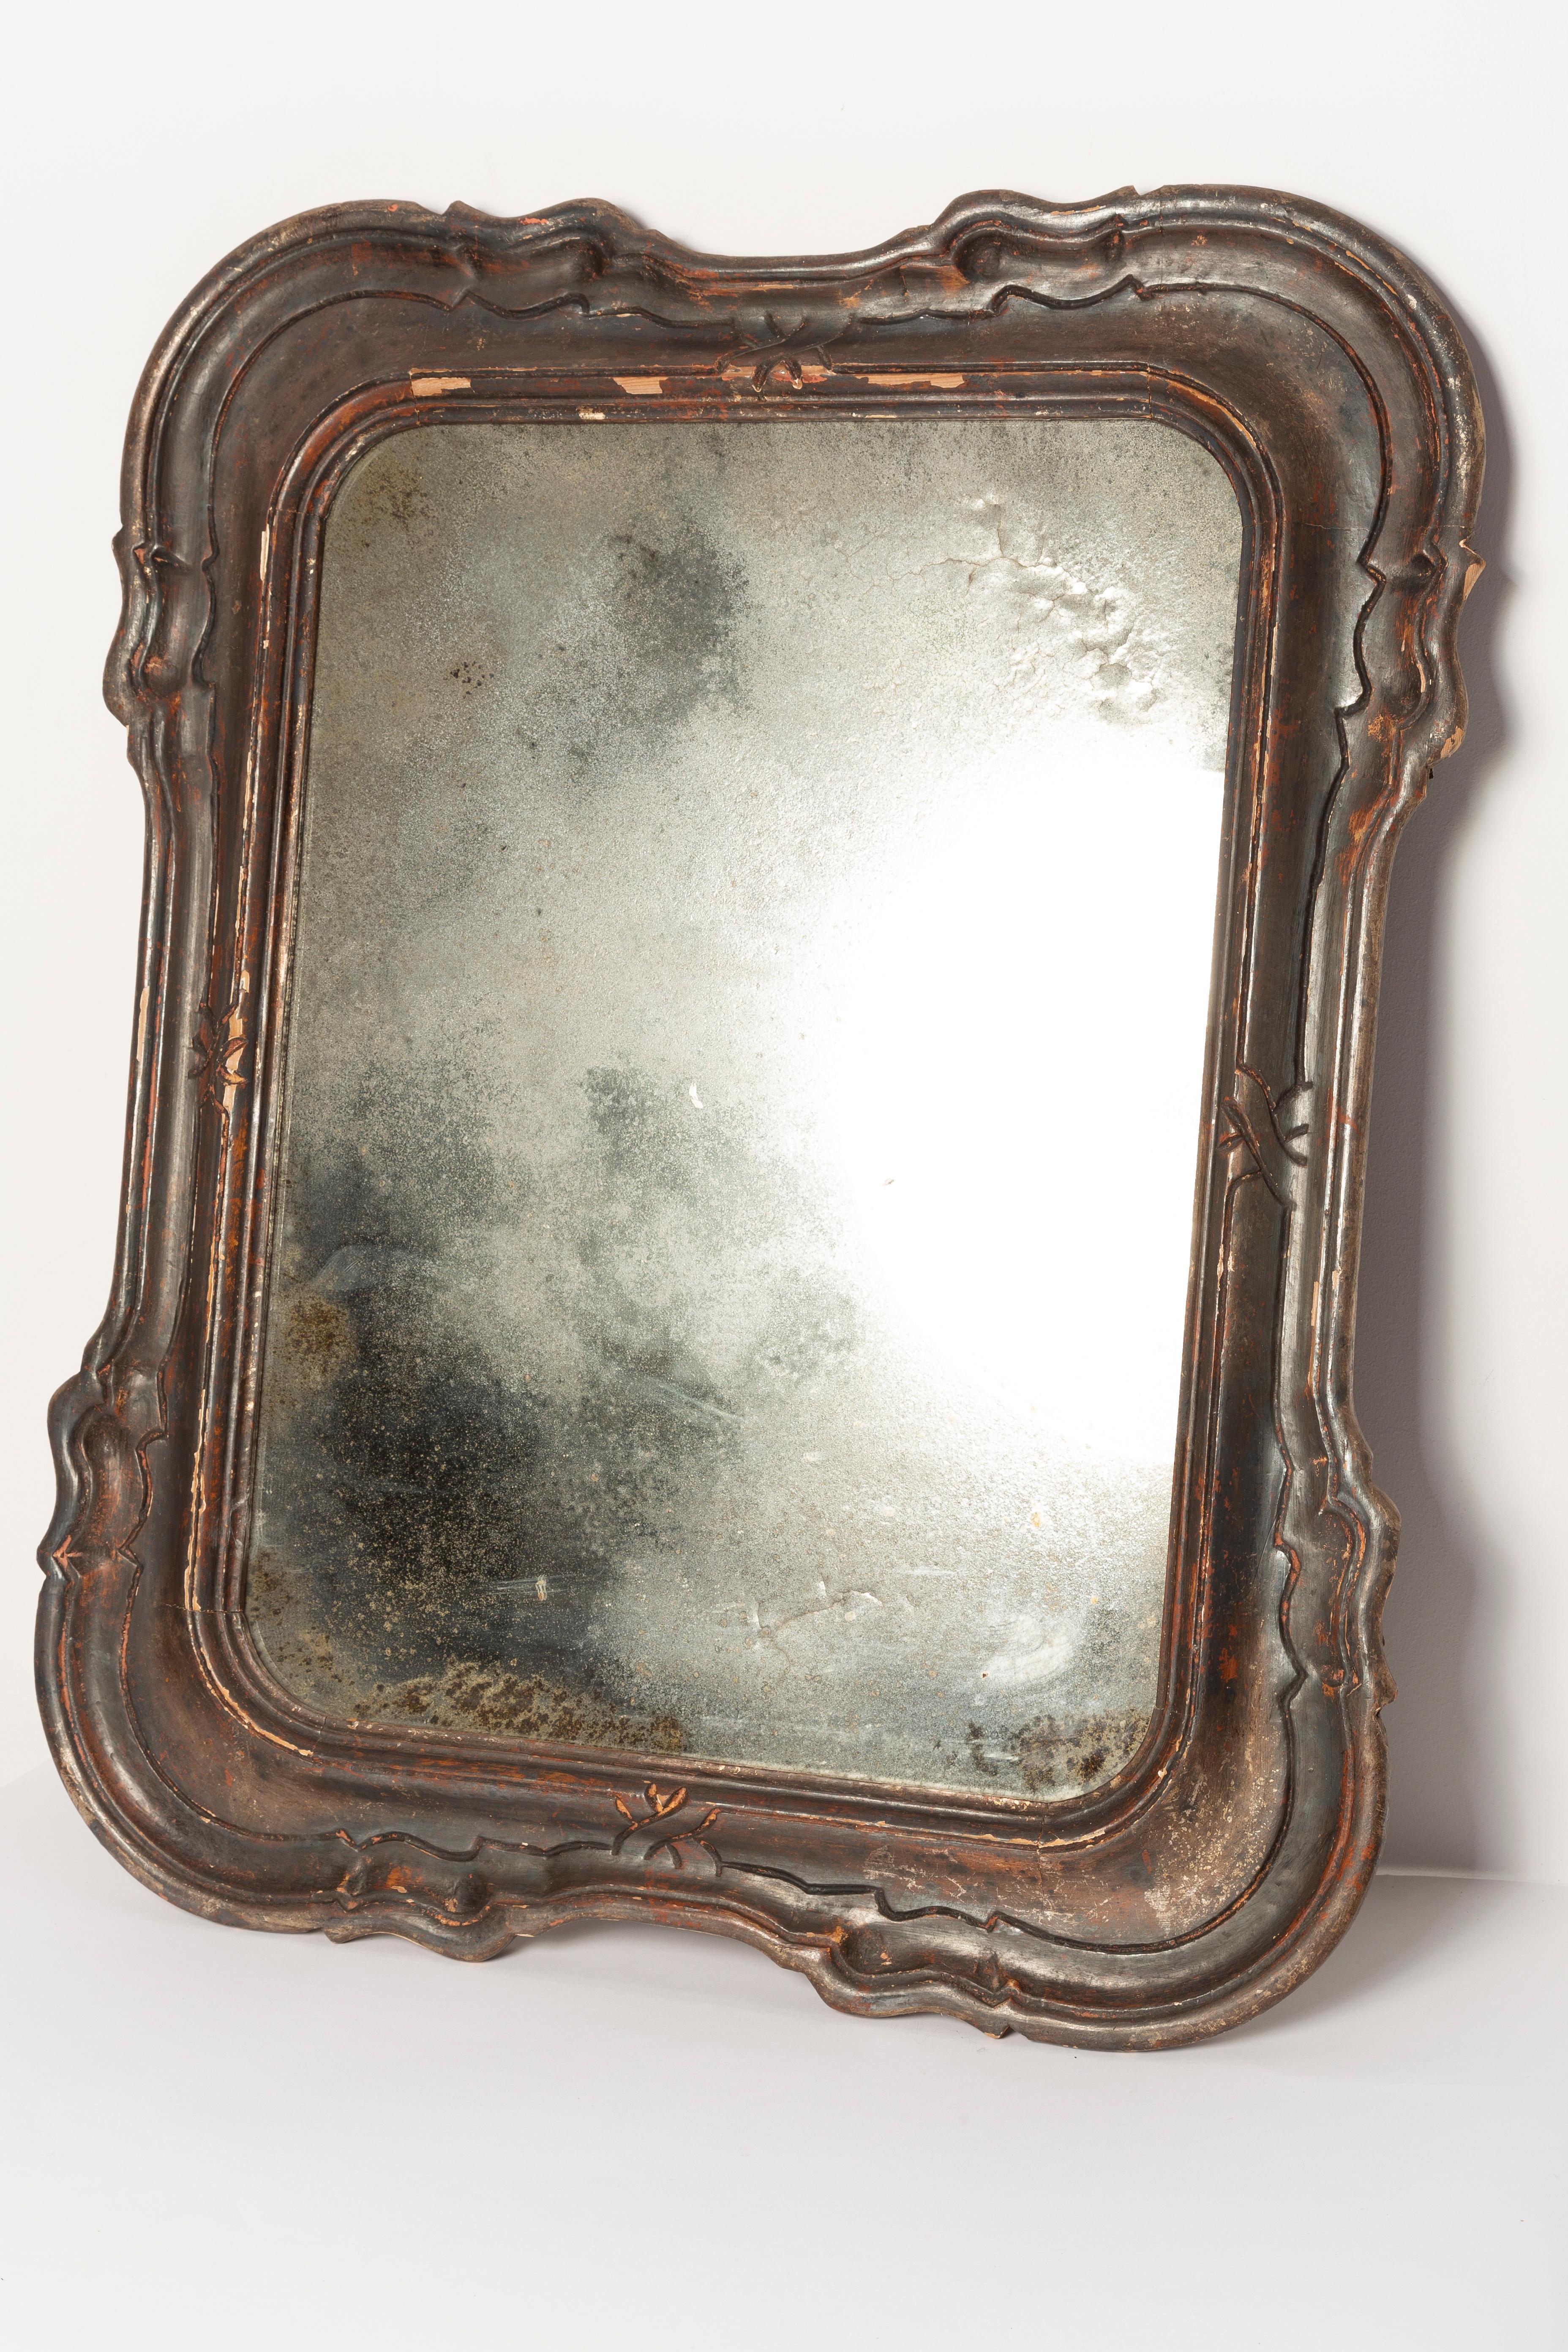 Beautiful mirror in a golden decorative frame from Italy. The frame is made of wood. Mirror is in very good vintage condition. Original glass. Amazing patina. Beautiful piece for every interior! Only one unique piece.